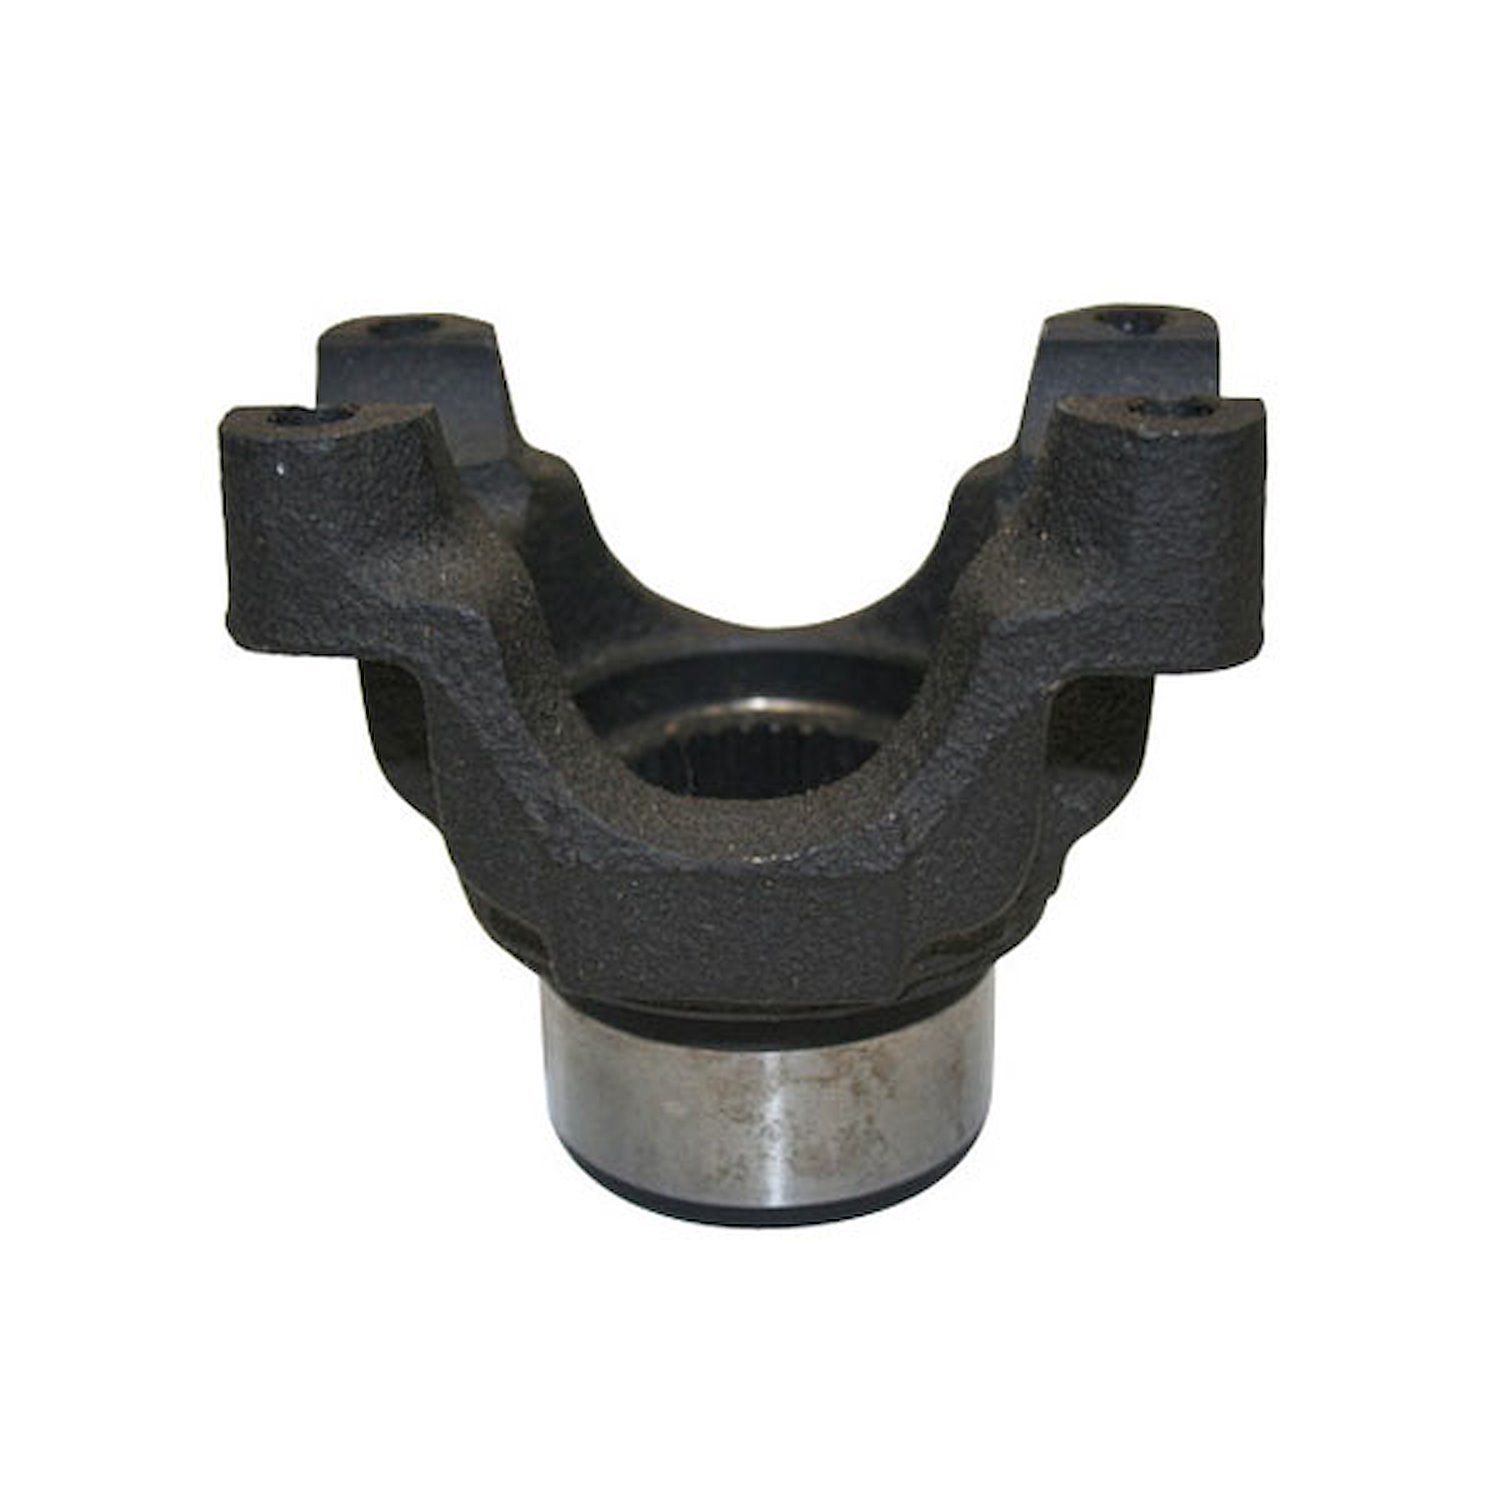 This 26 spline yoke from Omix-ADA is for